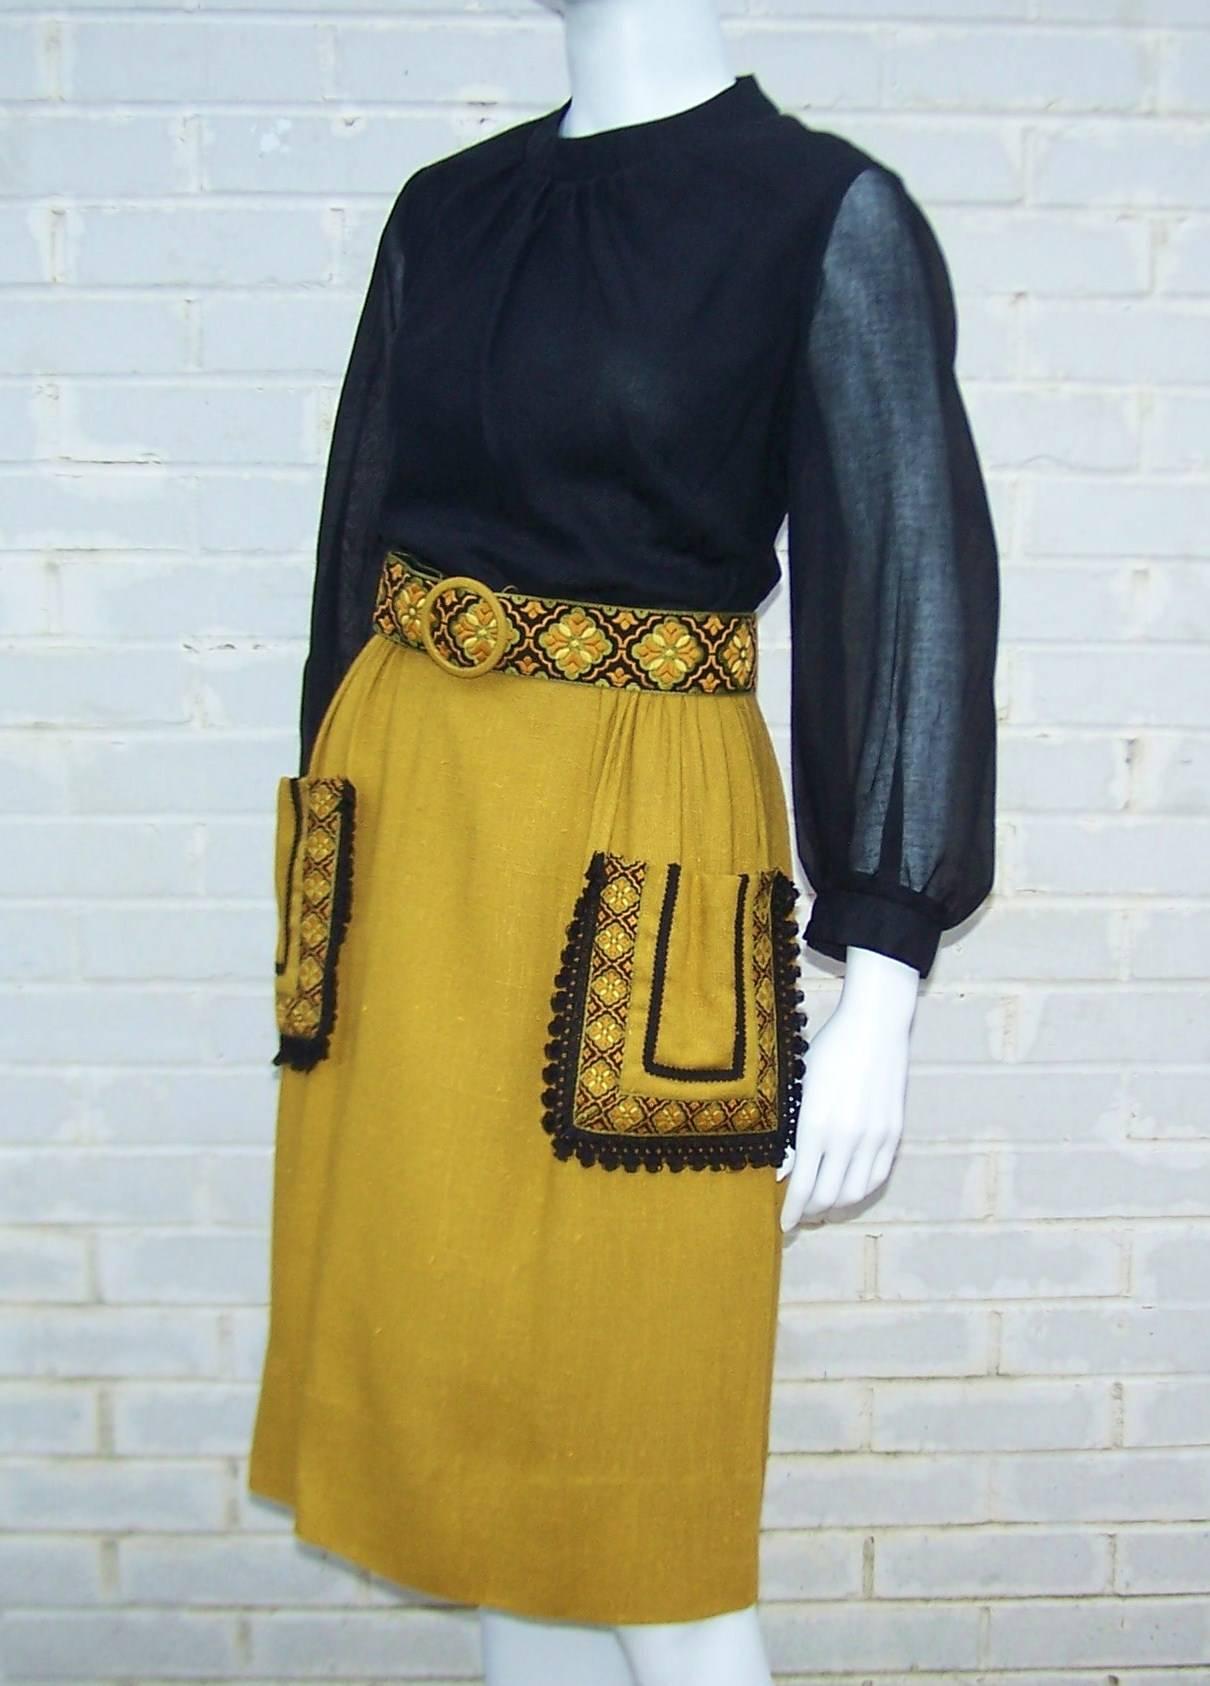 Great day dress for any occasion!  This bohemian style Herman Marcus dress has a black lined muslin bodice with sheer sleeves and a nubby dark gold (with a hint of green) linen blend skirt accented with large front pockets.  The embroidered brocade